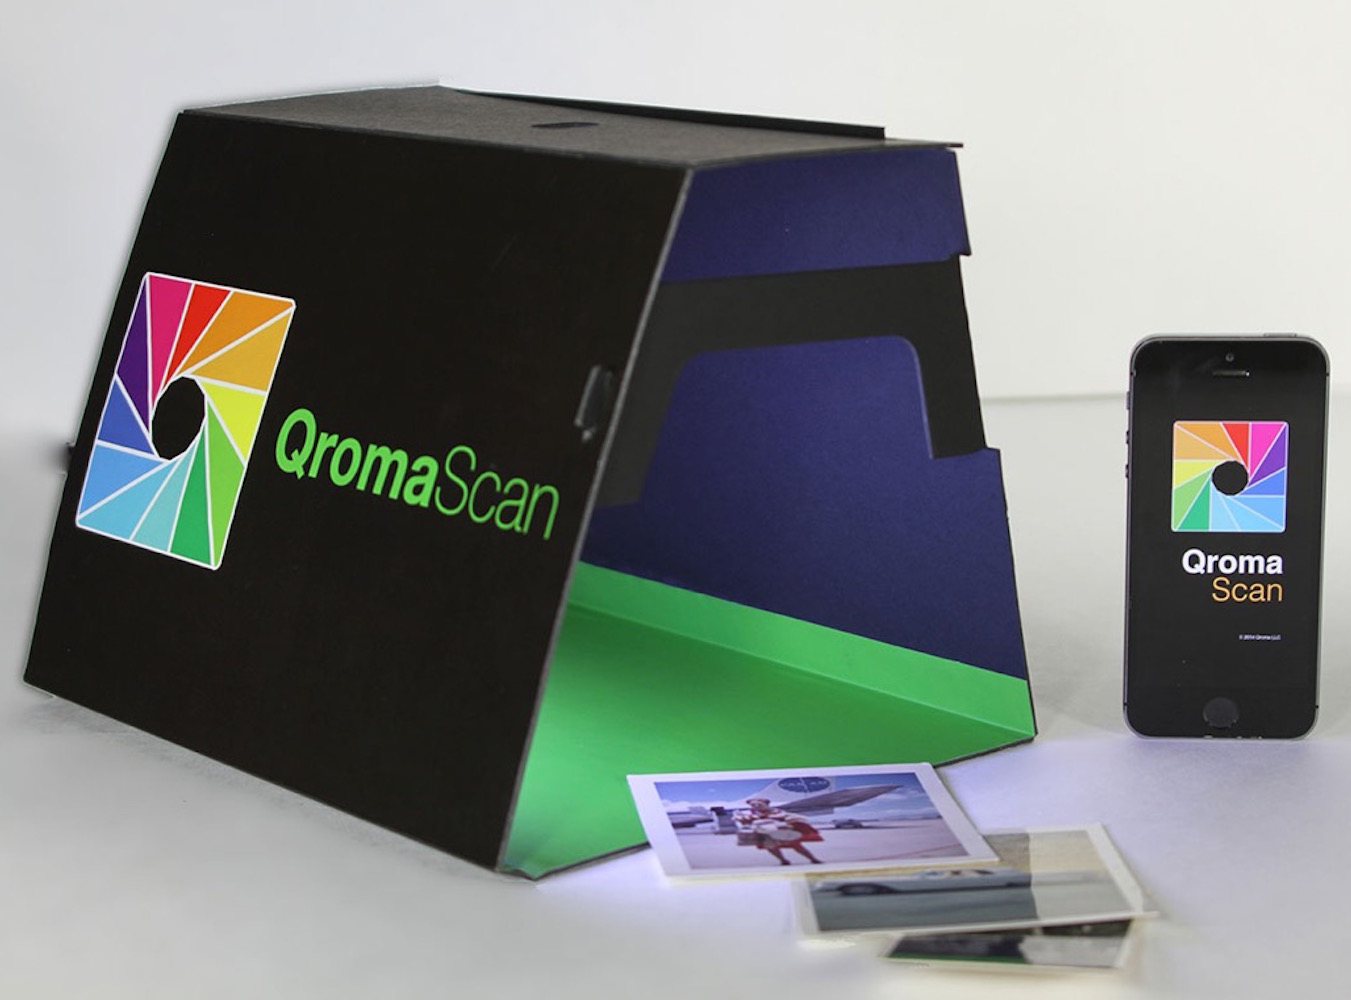 QromaScan – A New, Smarter Way to Scan Photos